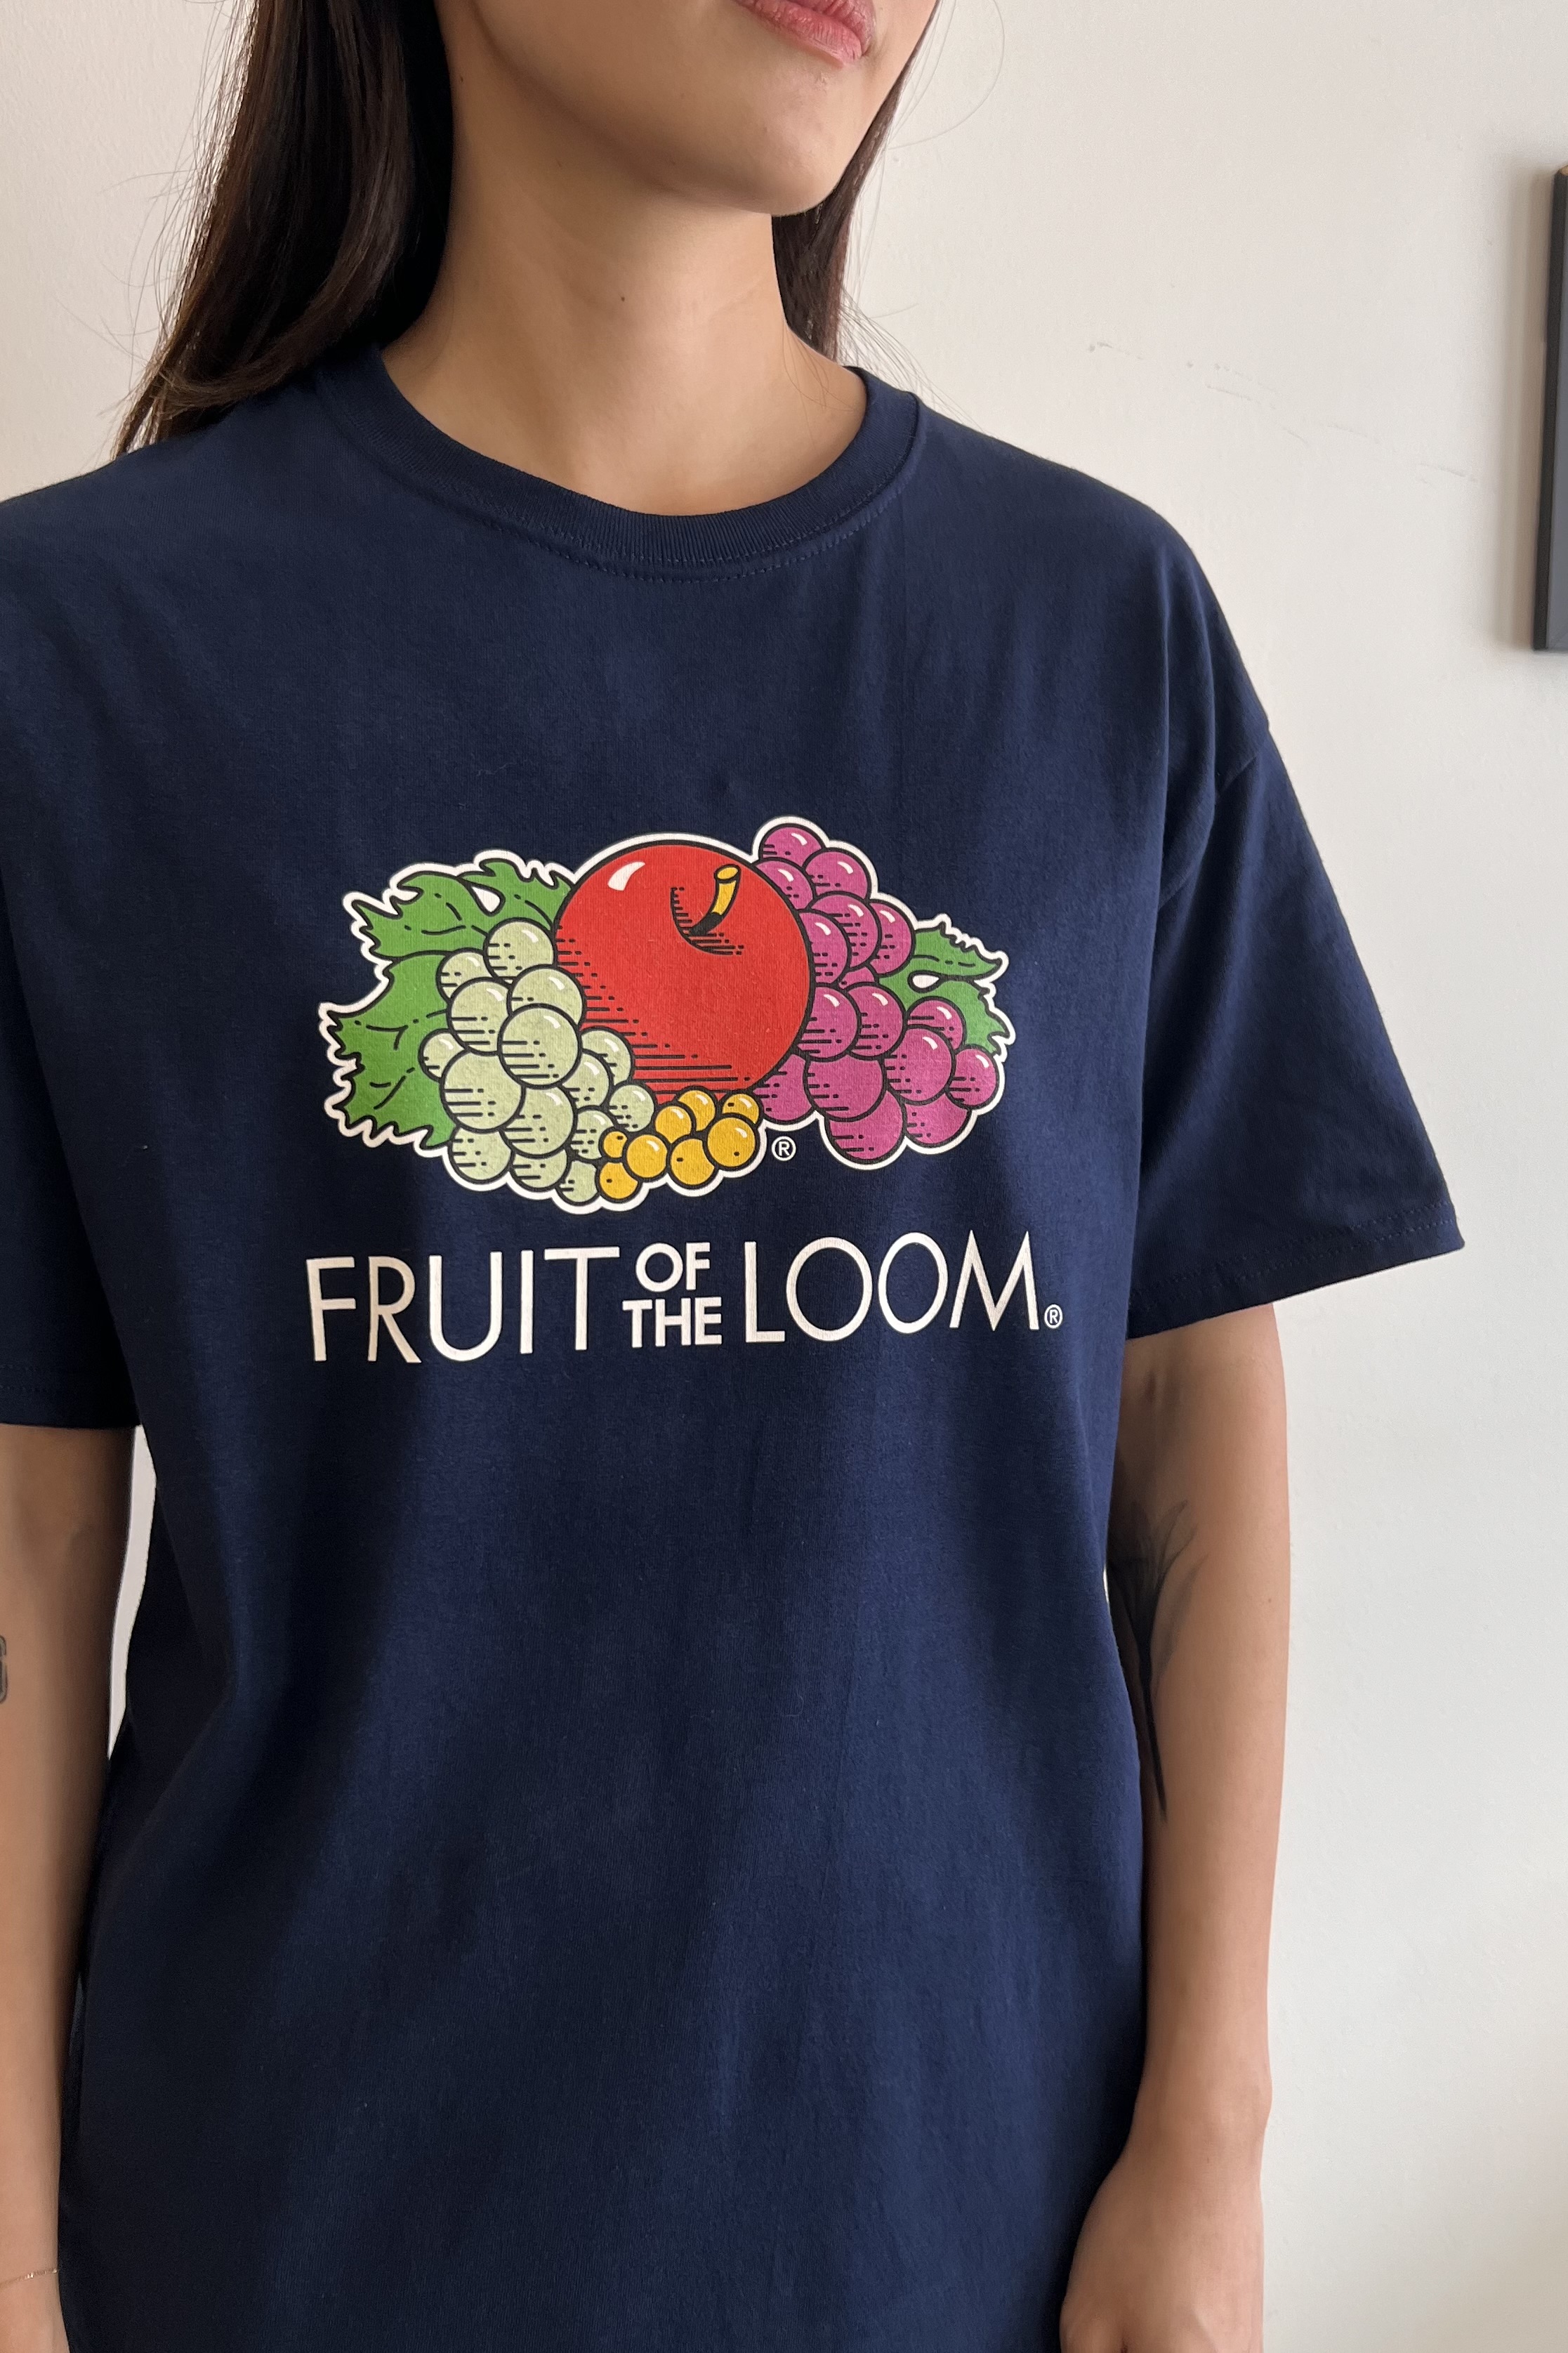 Fruit of the Loom, Shirts